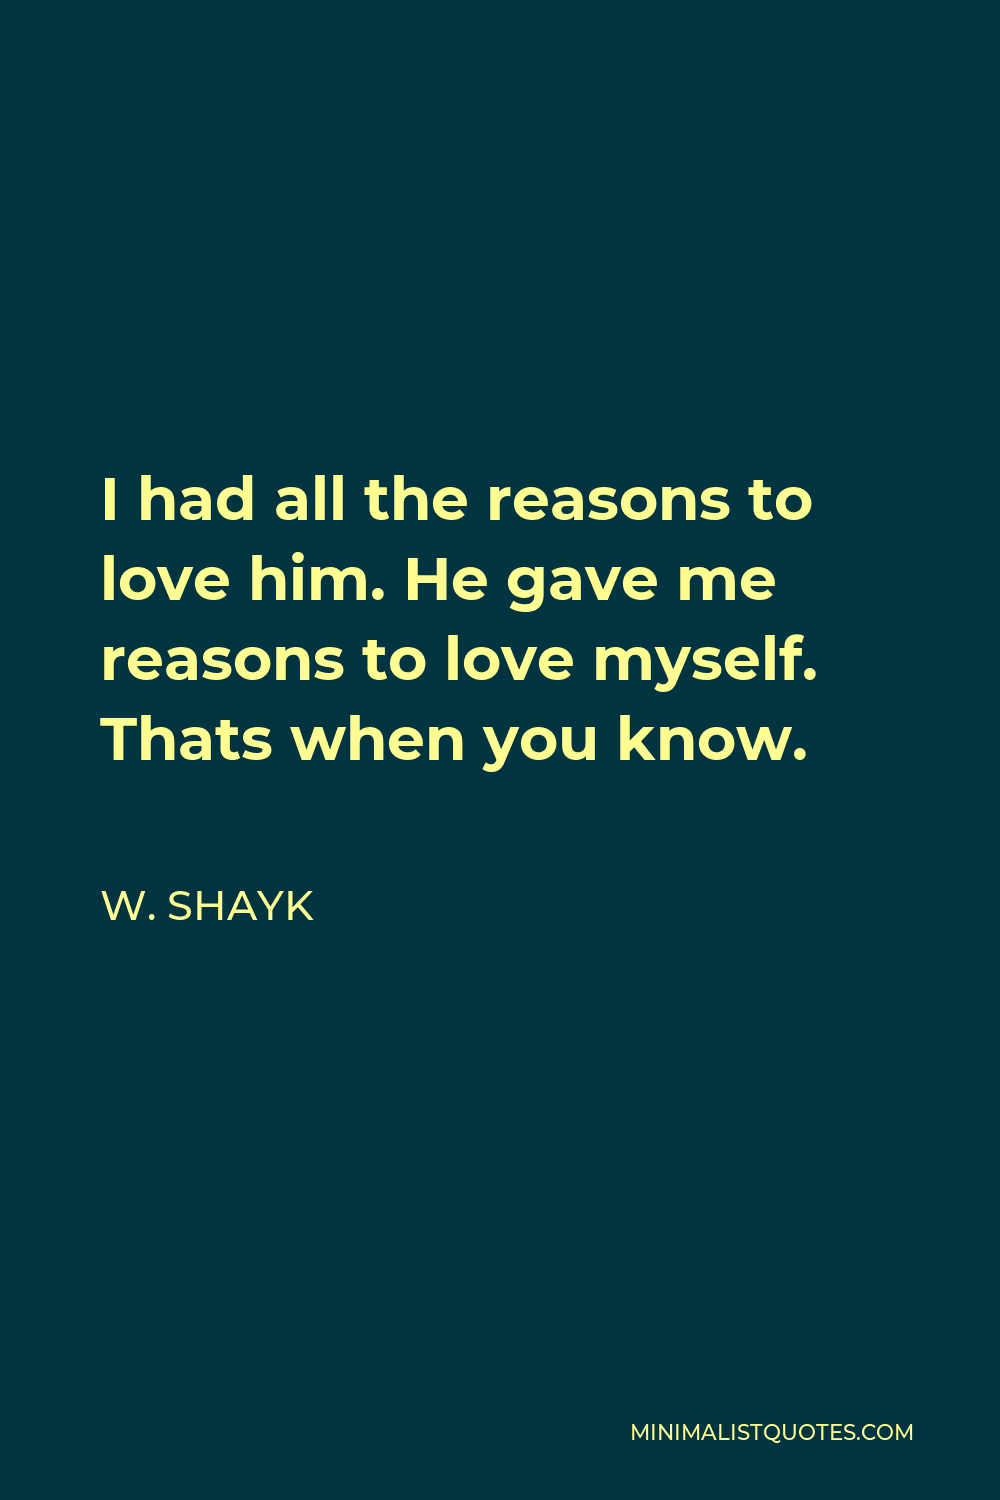 W. Shayk Quote - I had all the reasons to love him. He gave me reasons to love myself. Thats when you know.